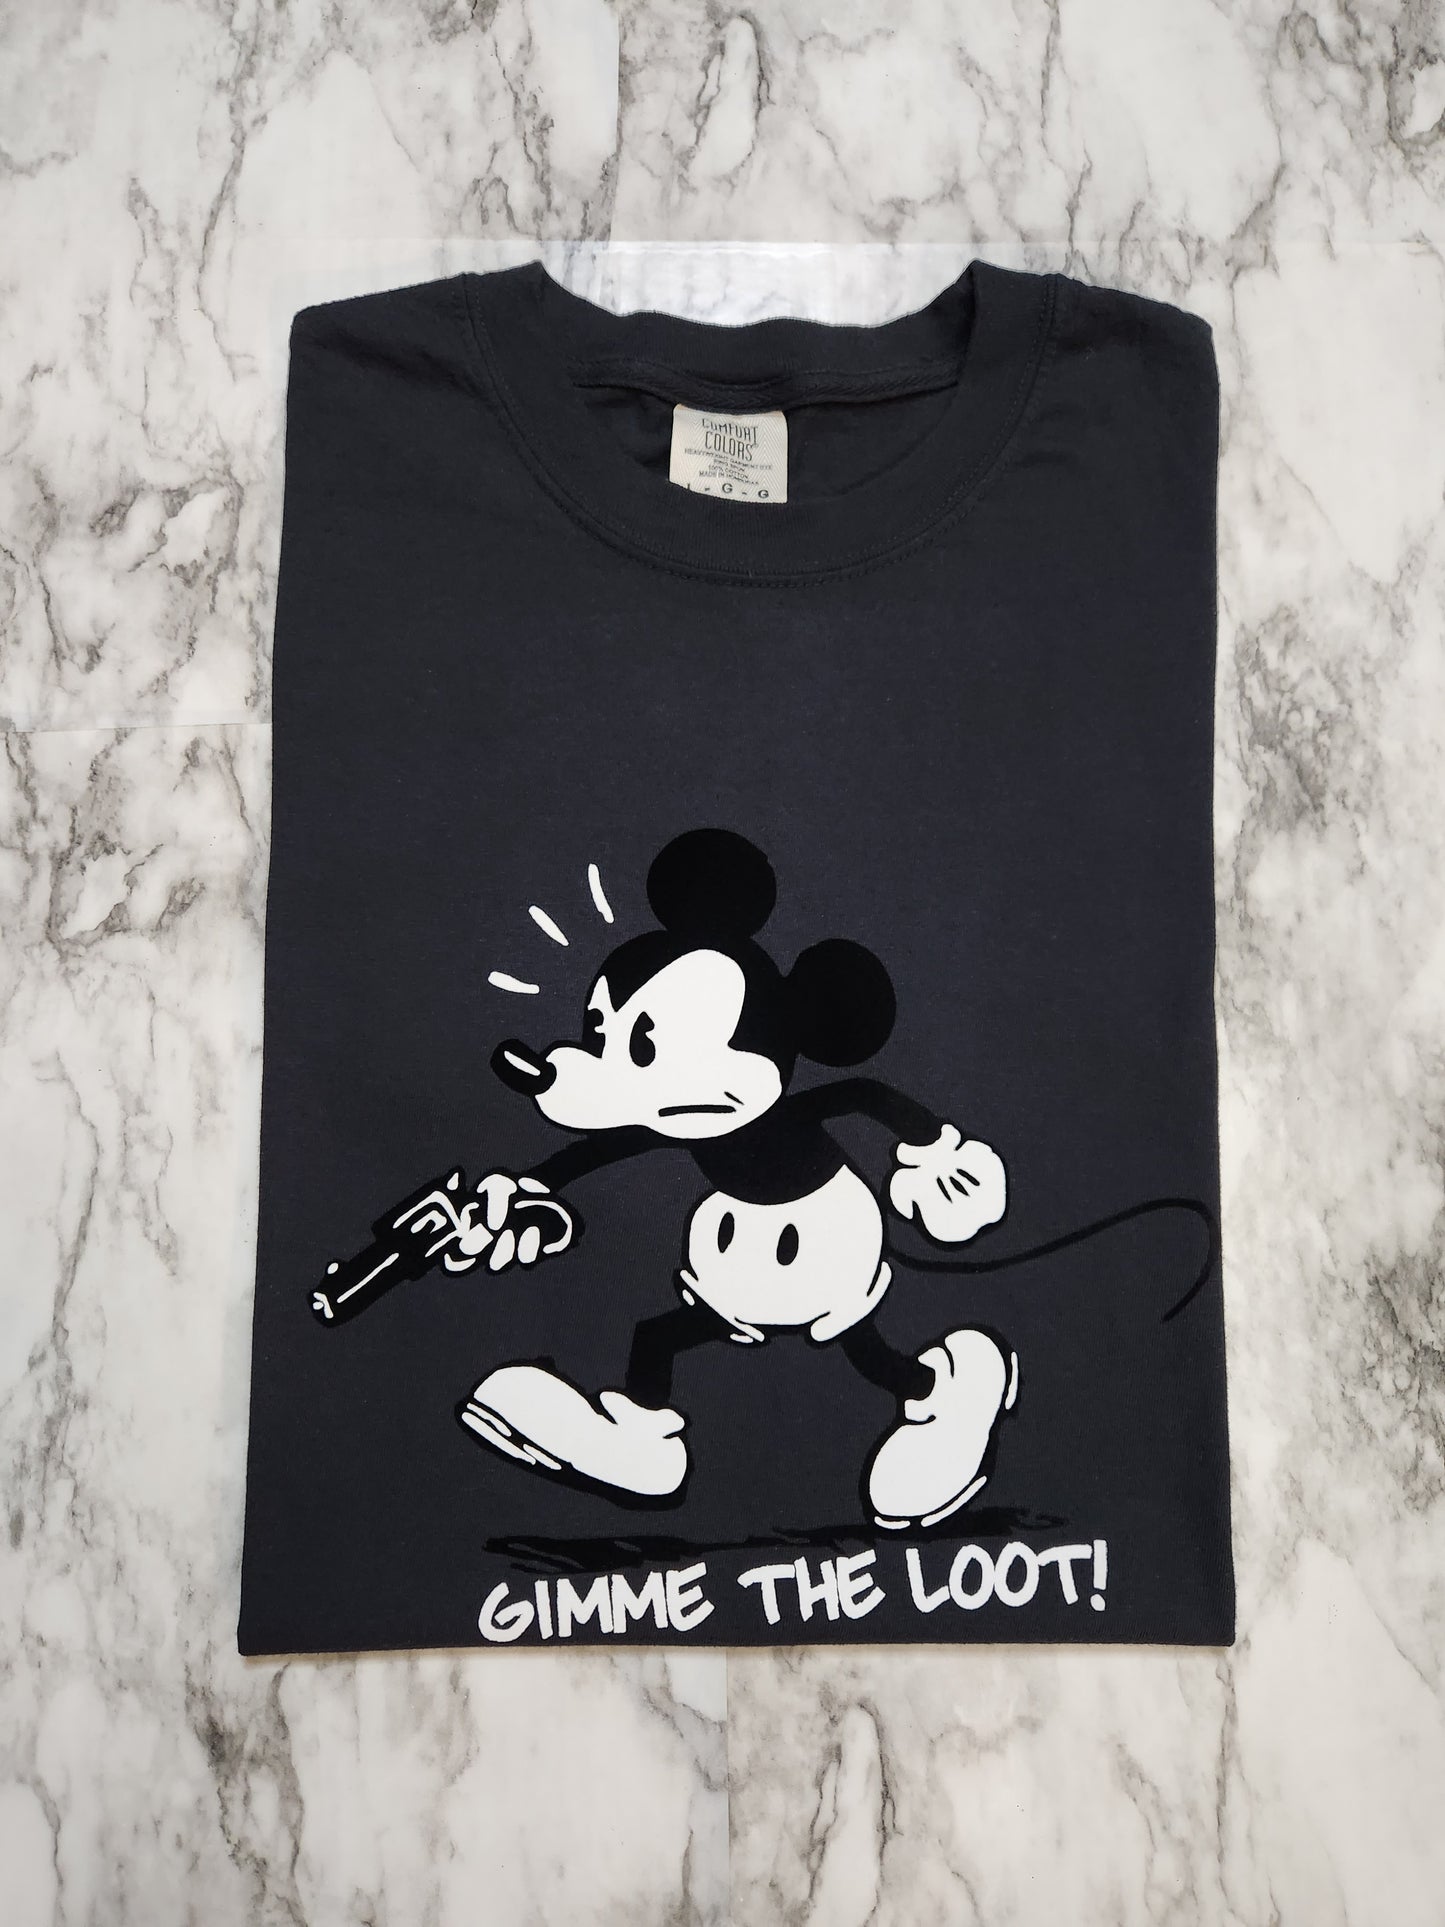 Gimme The Loot T-Shirt